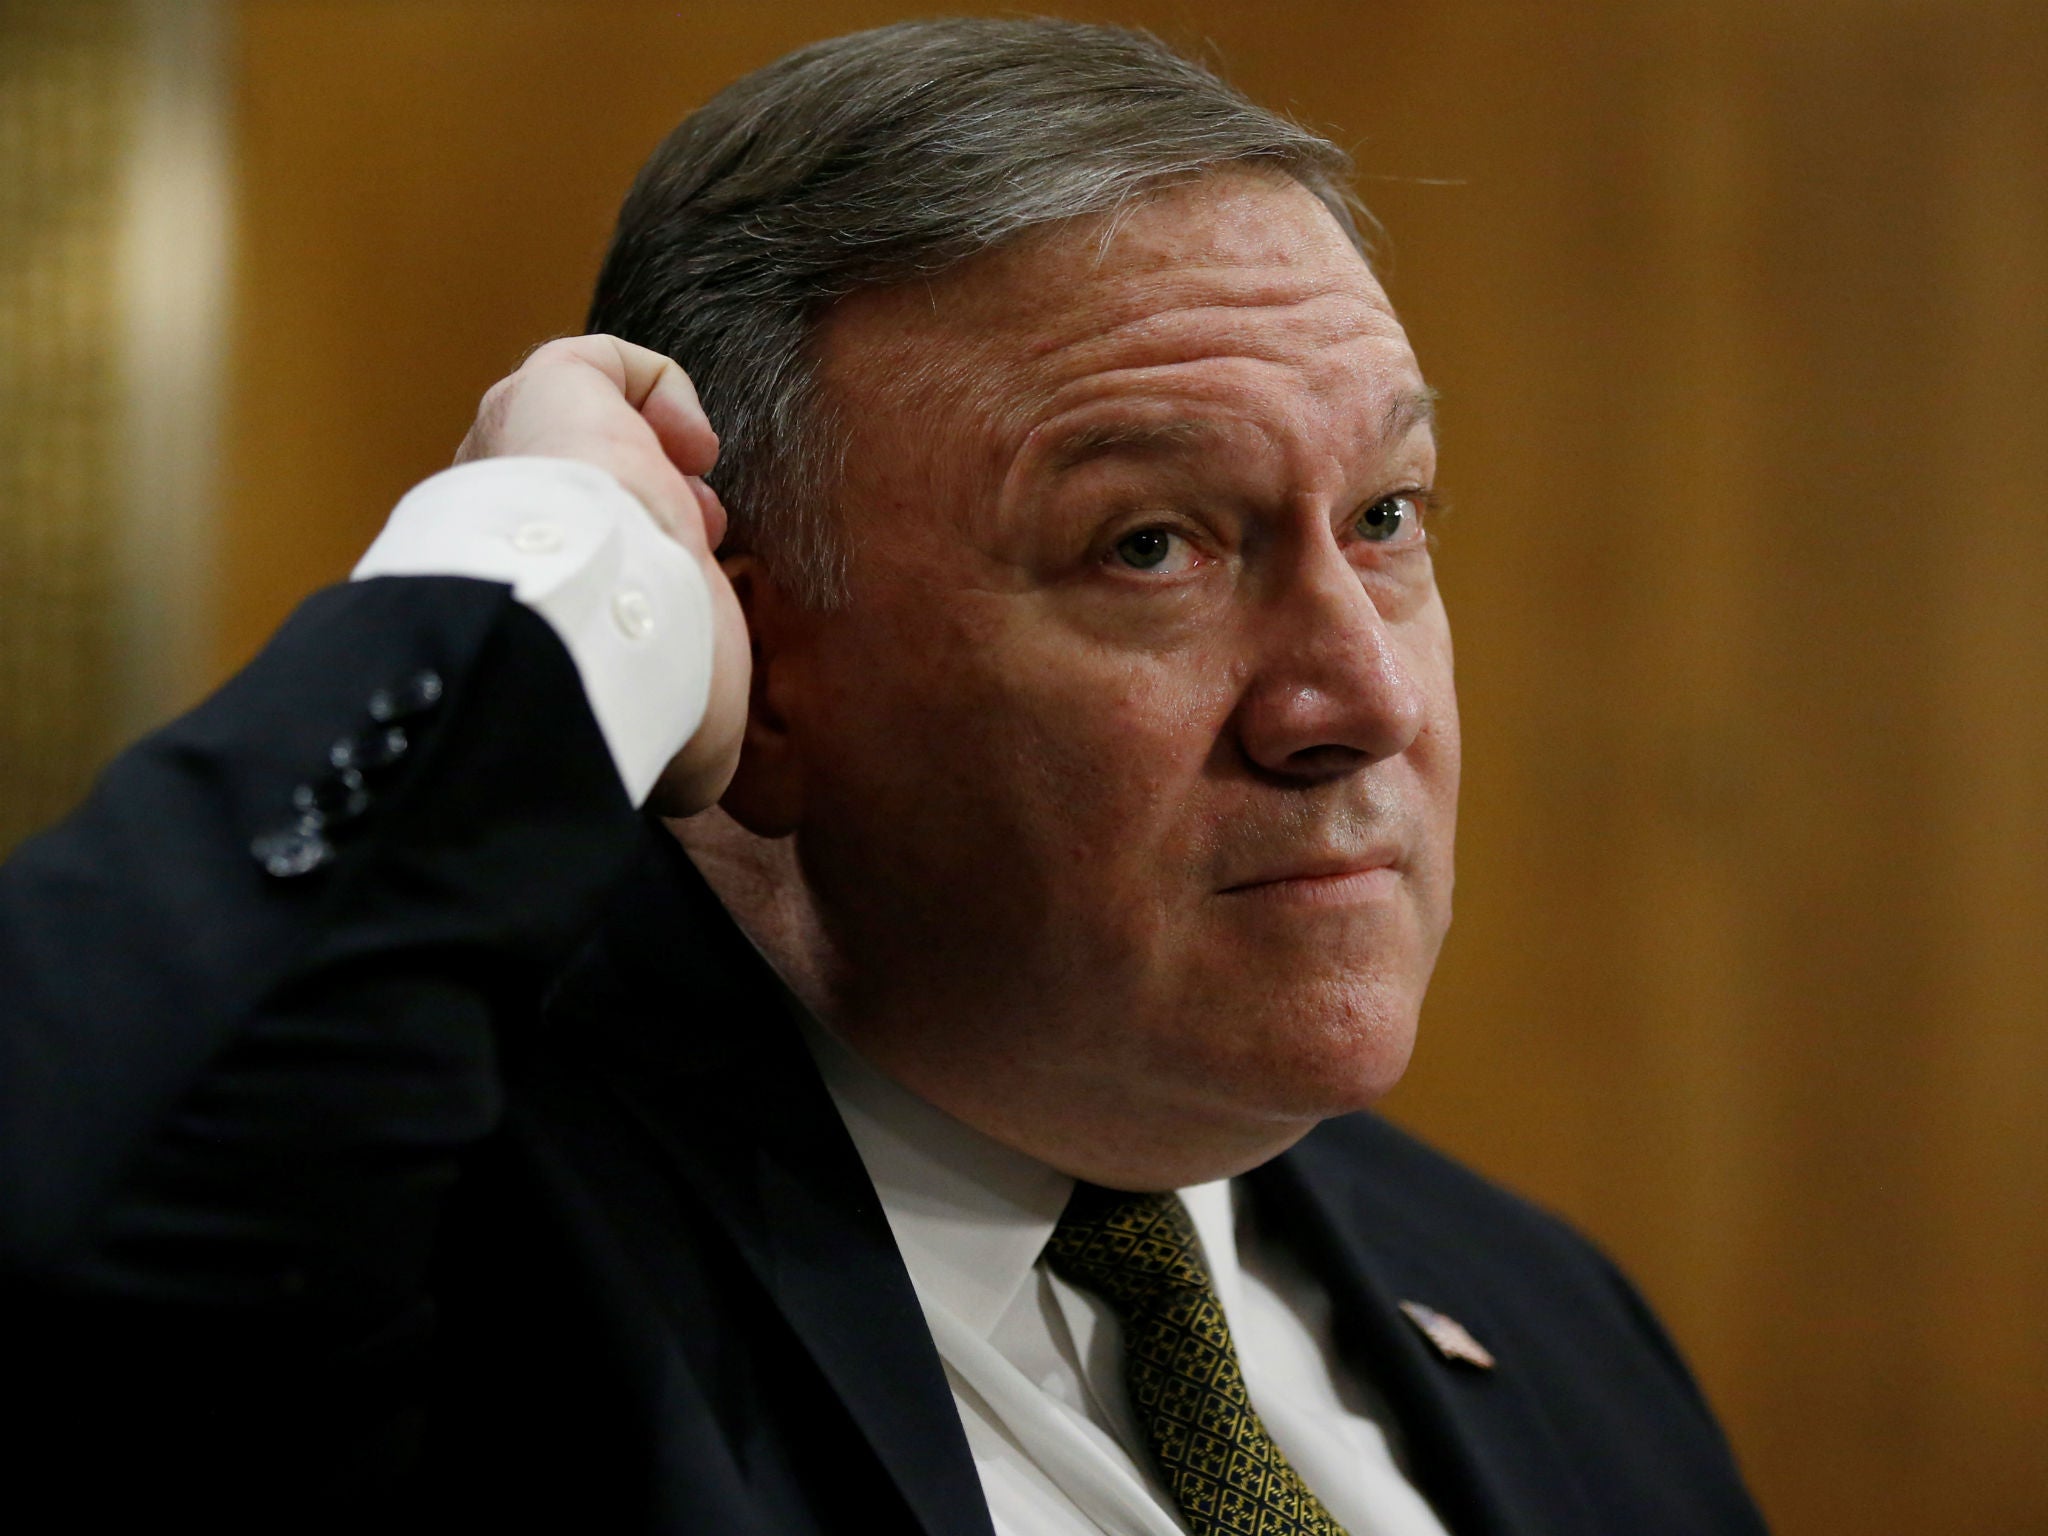 CIA Director Mike Pompeo testifies before the Senate Foreign Relations Committee in Washington, DC